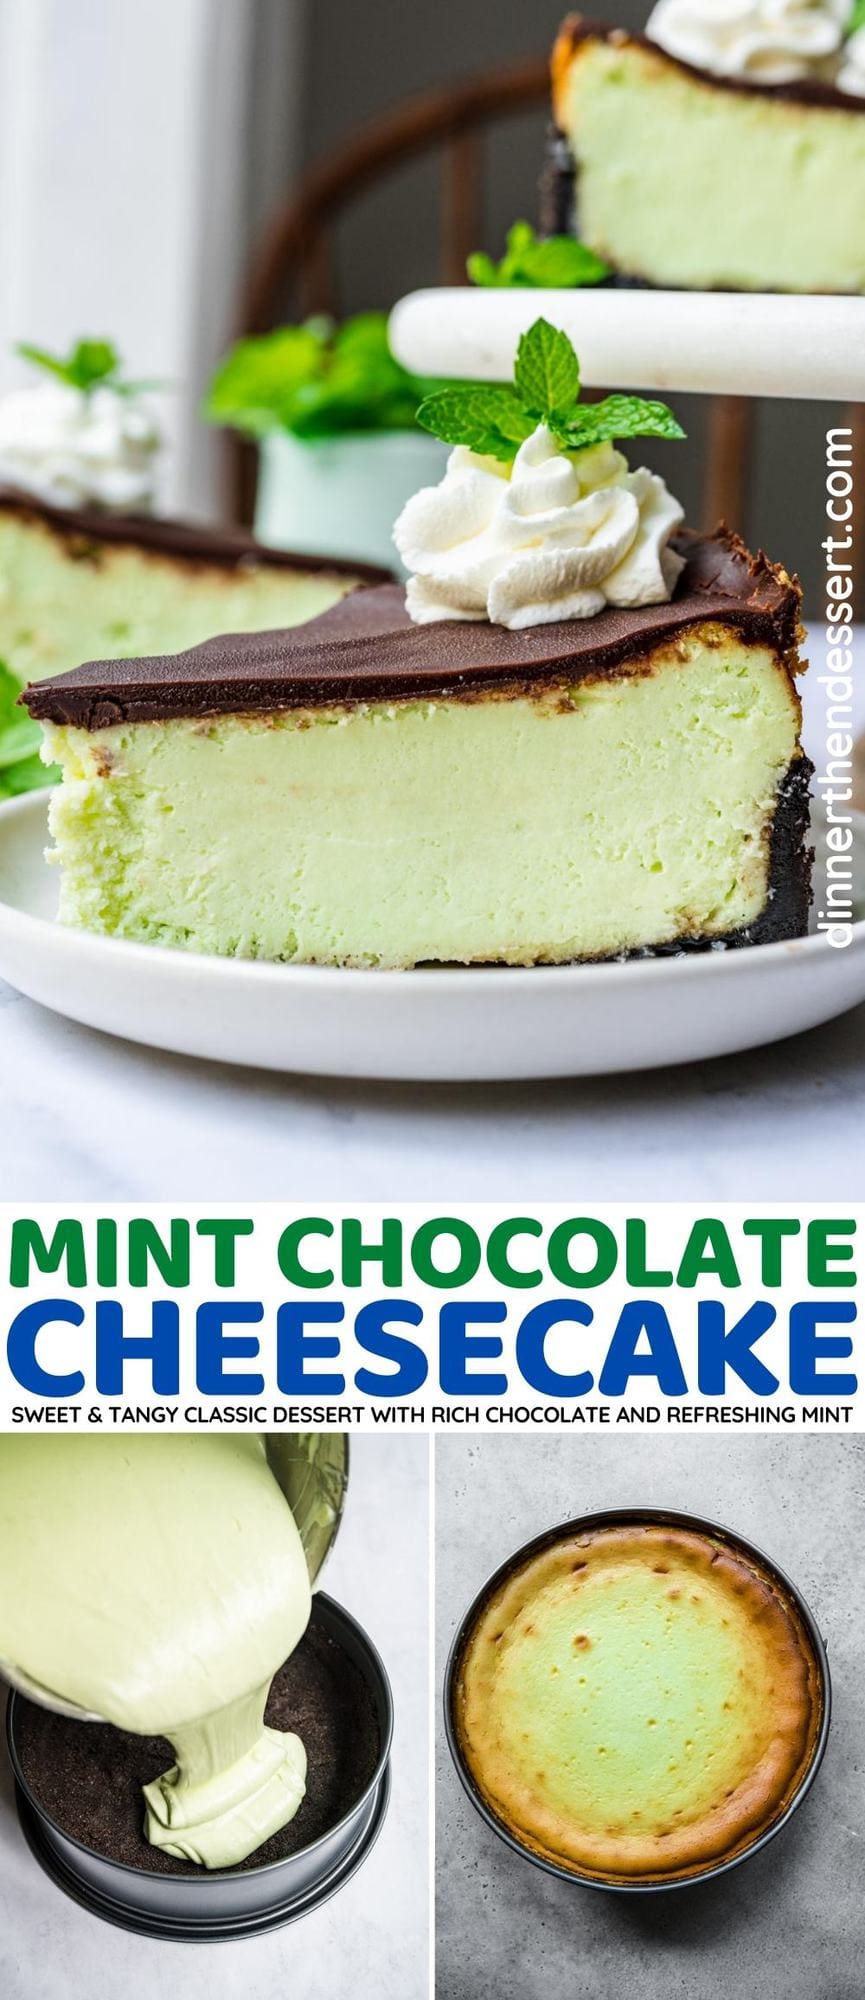 Mint Chocolate Cheesecake collage